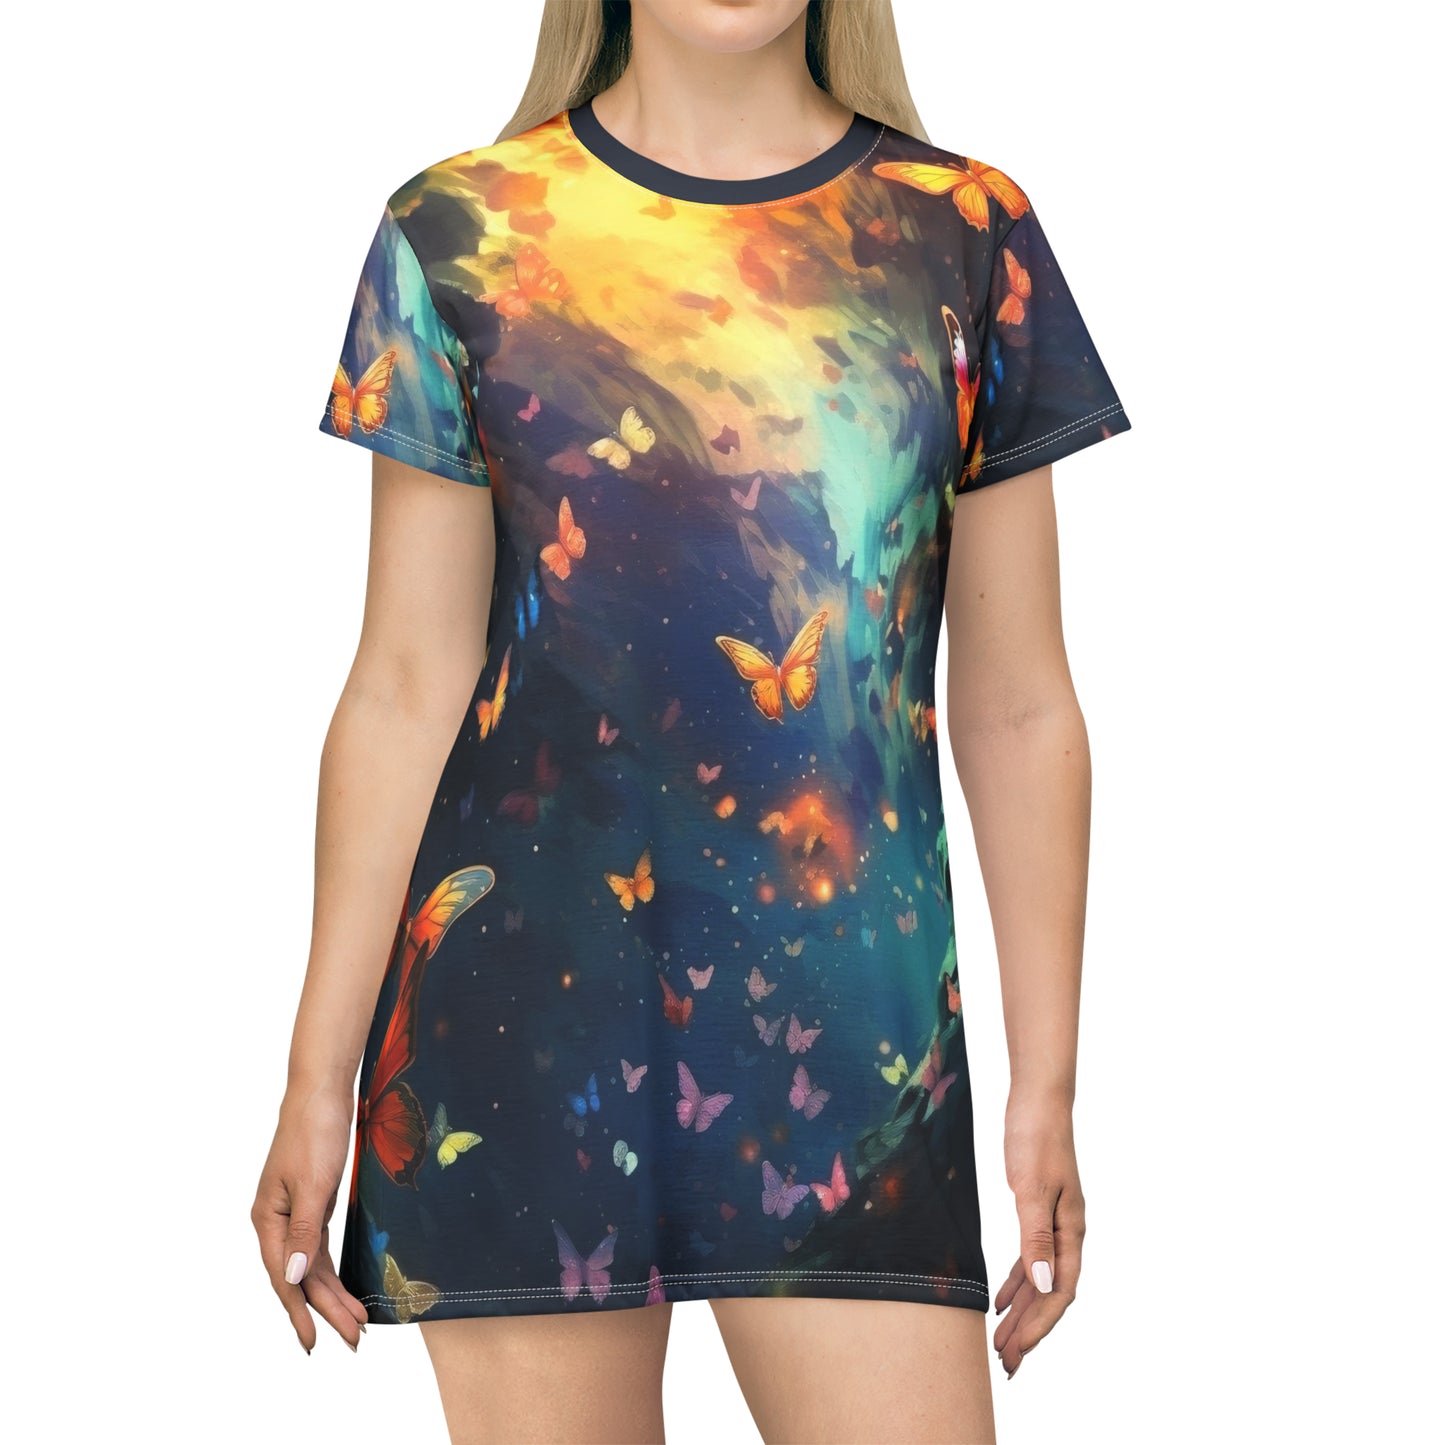 Casual Butterfly Print T-Shirt Dress - Eye-Catching and Comfortable for Summer Fun